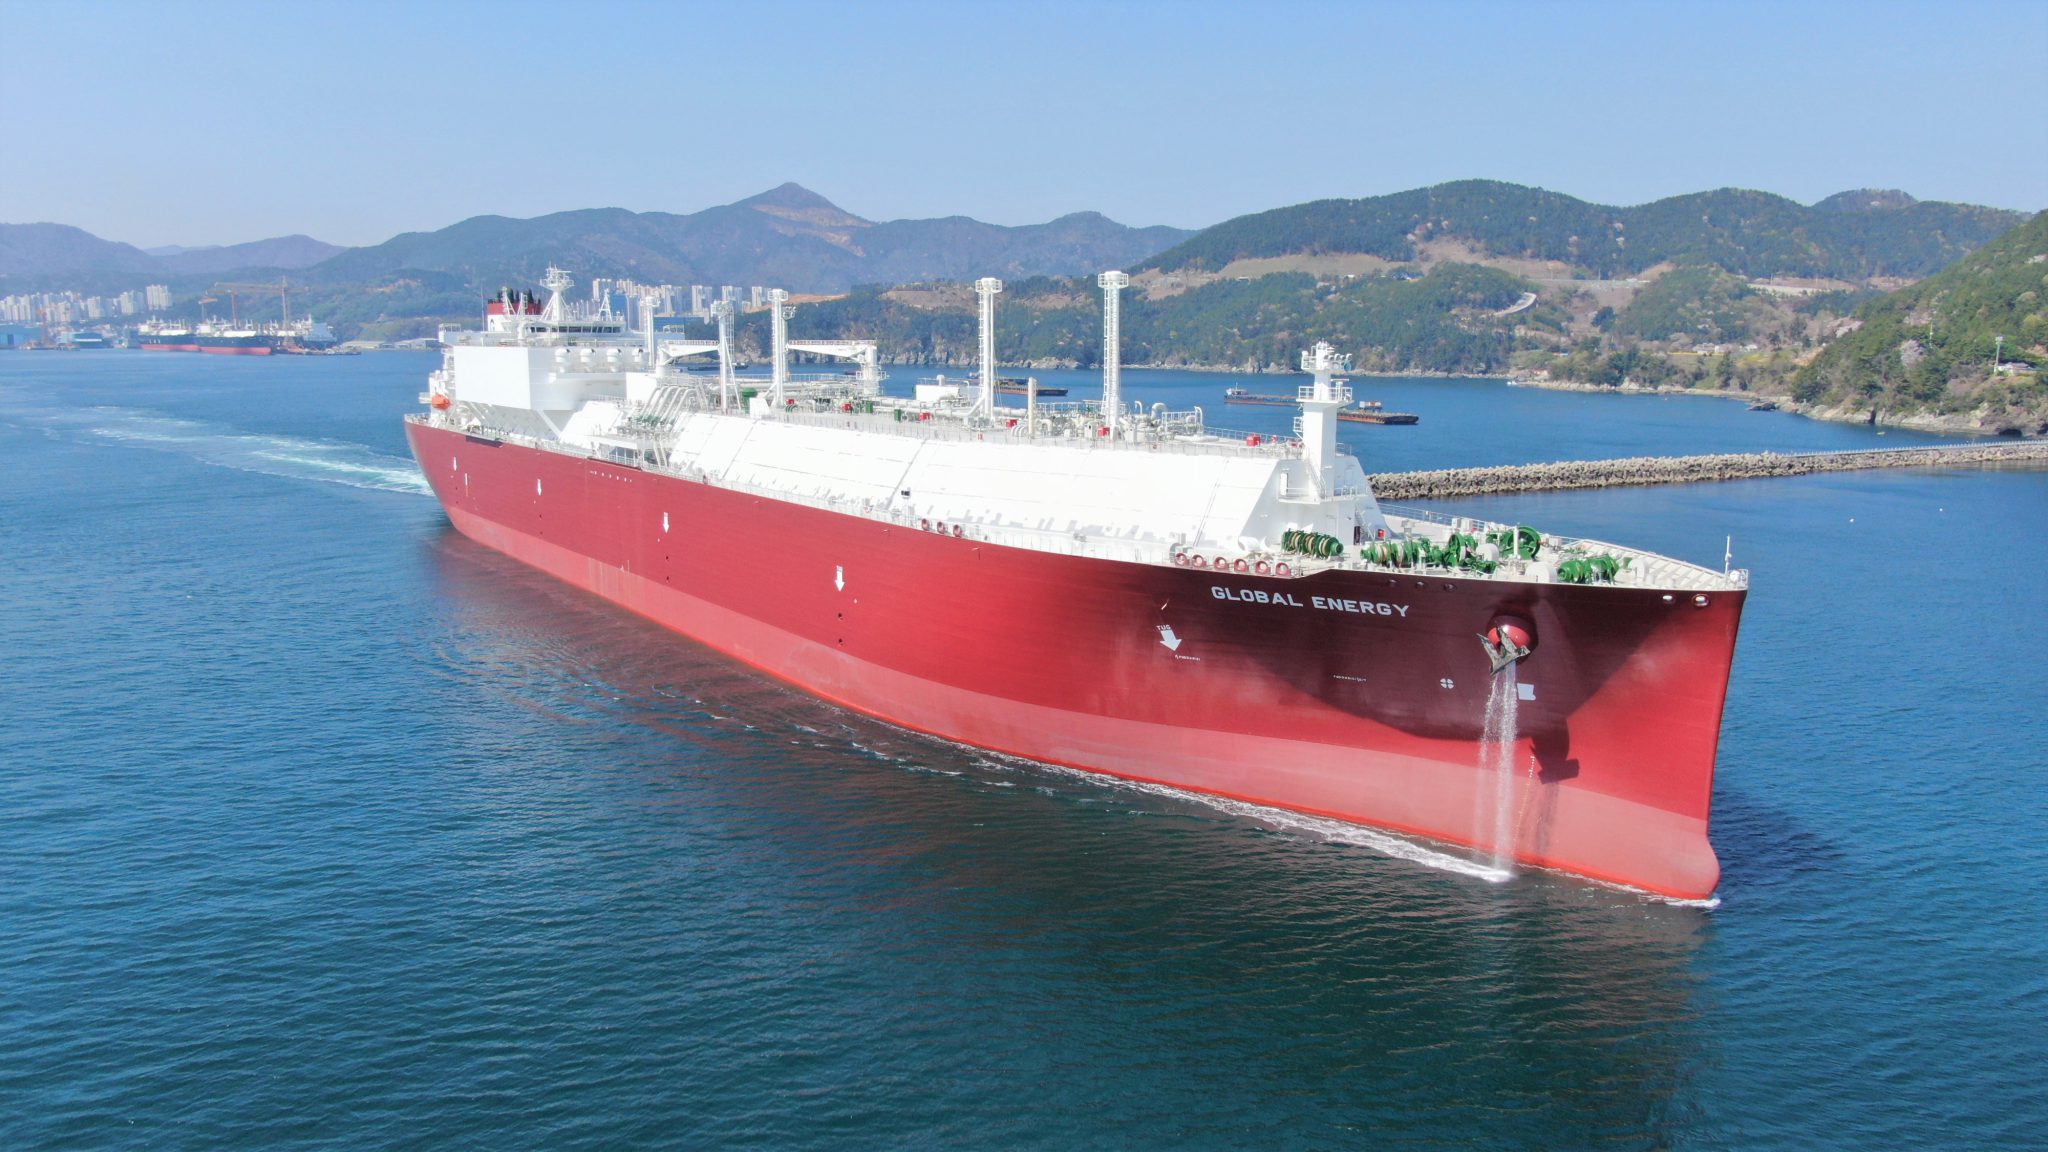 Nakilat takes delivery and management of LNG carrier newbuild